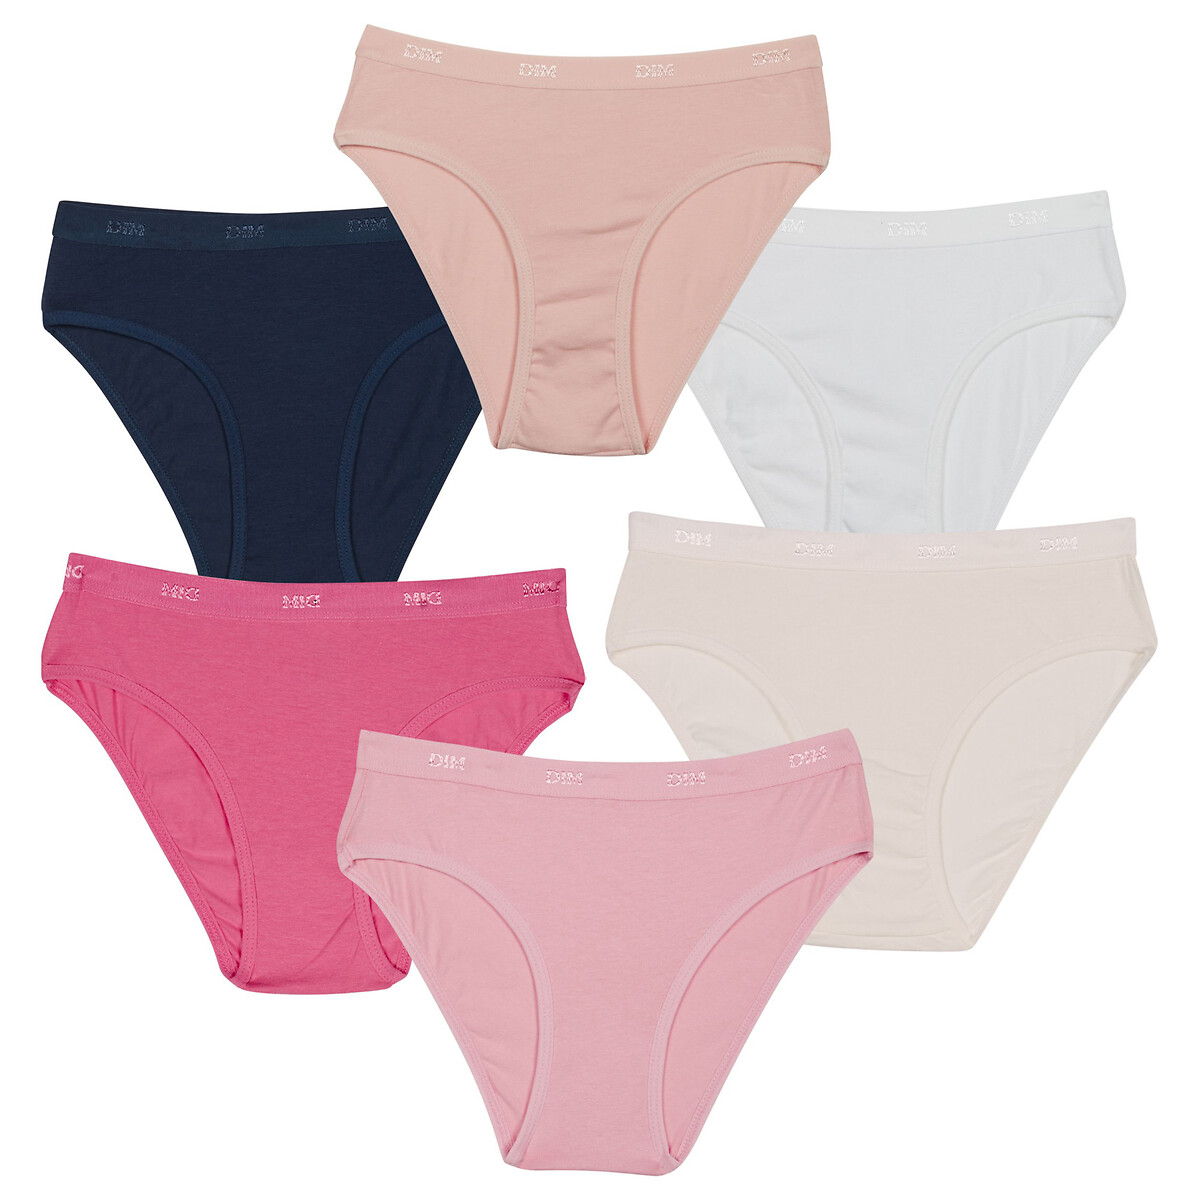 Pack of 6 pocket knickers, multi-coloured, Dim